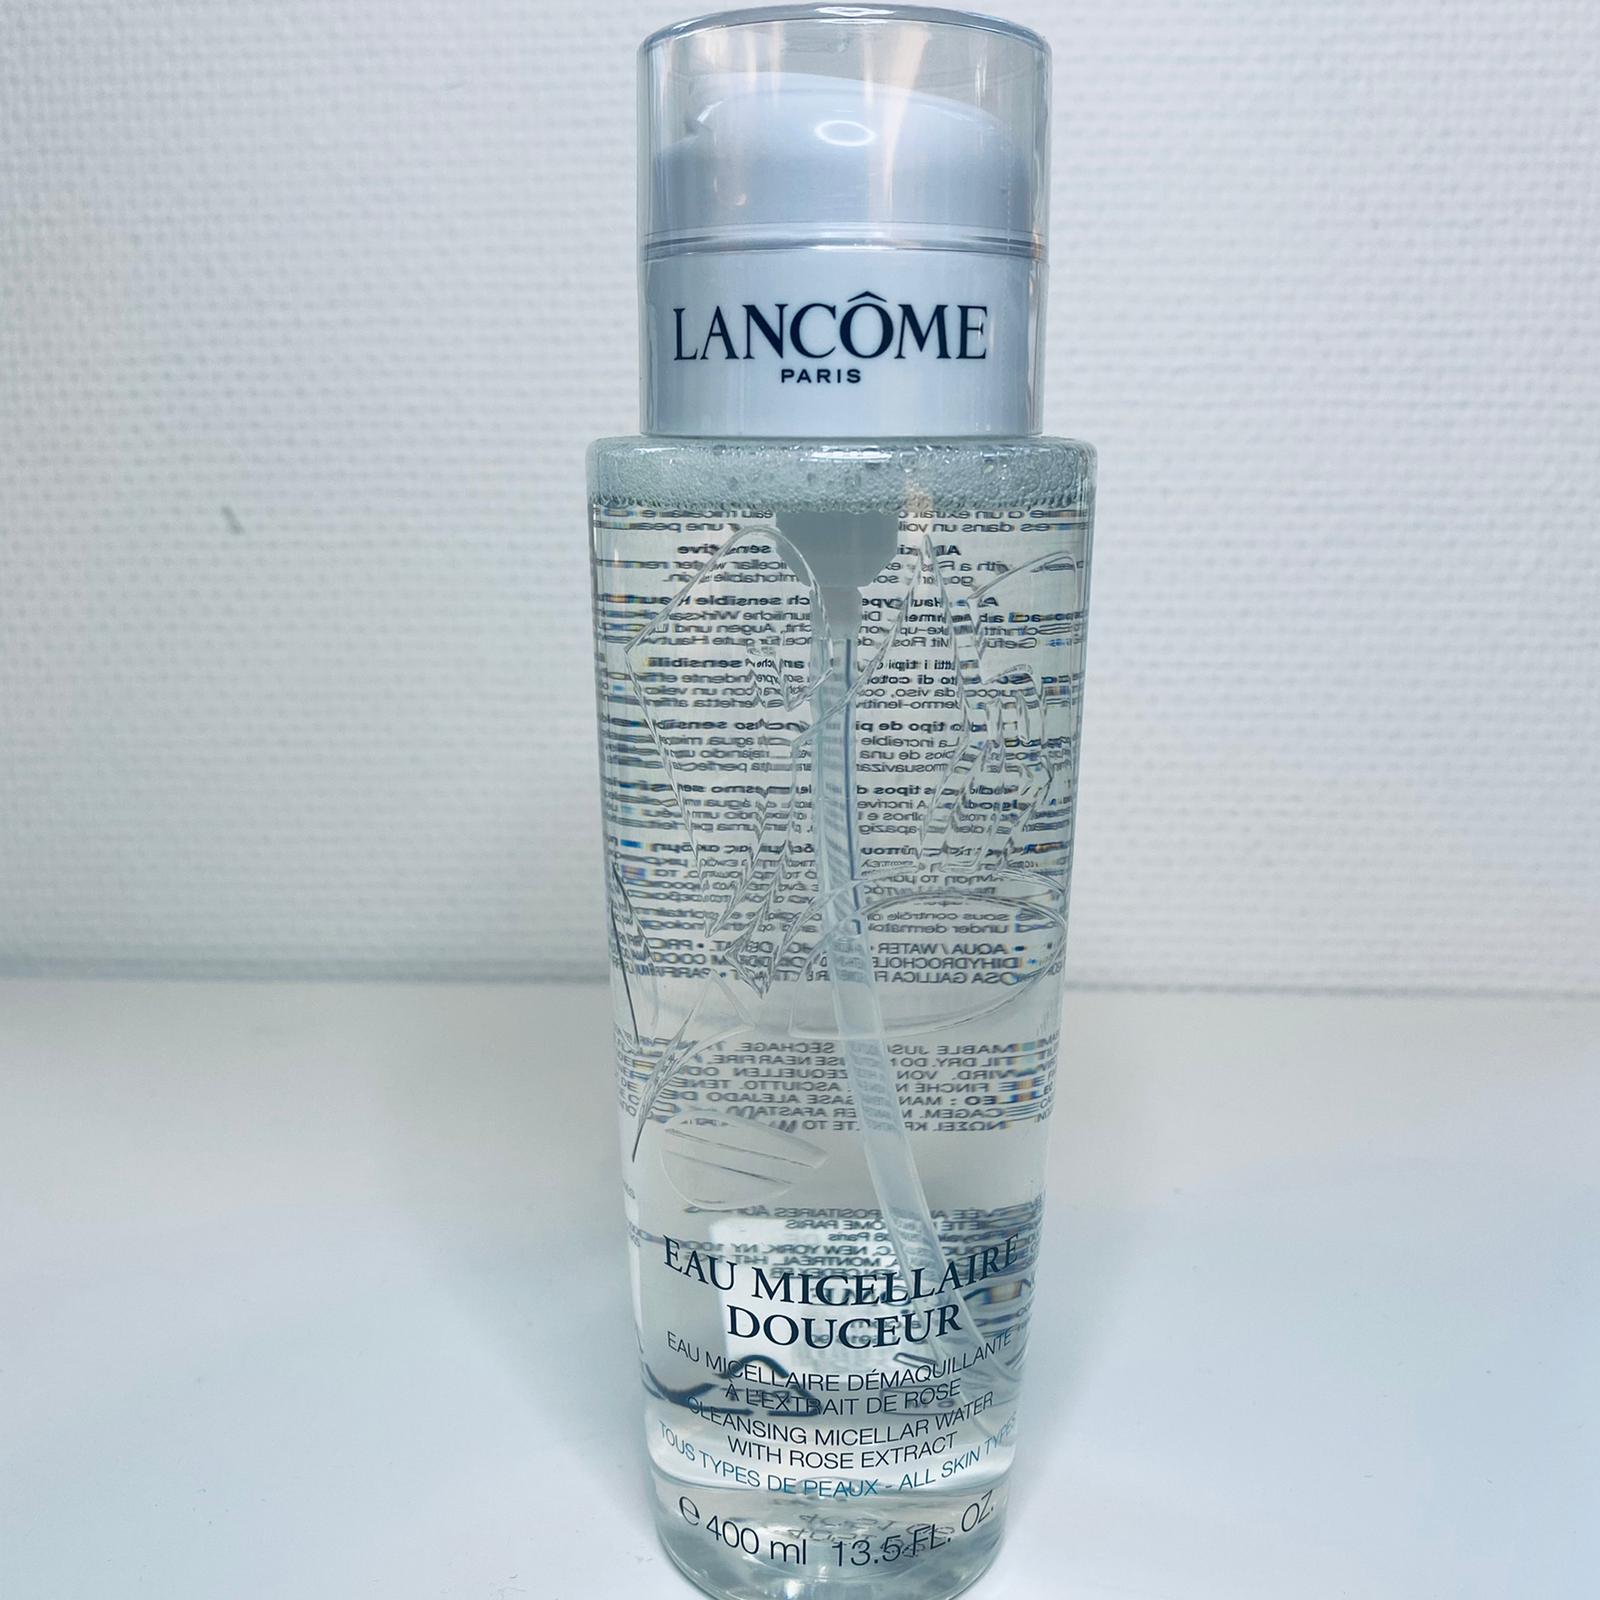 Lancome Eau Micellaire Douceur all skin types 400 ml